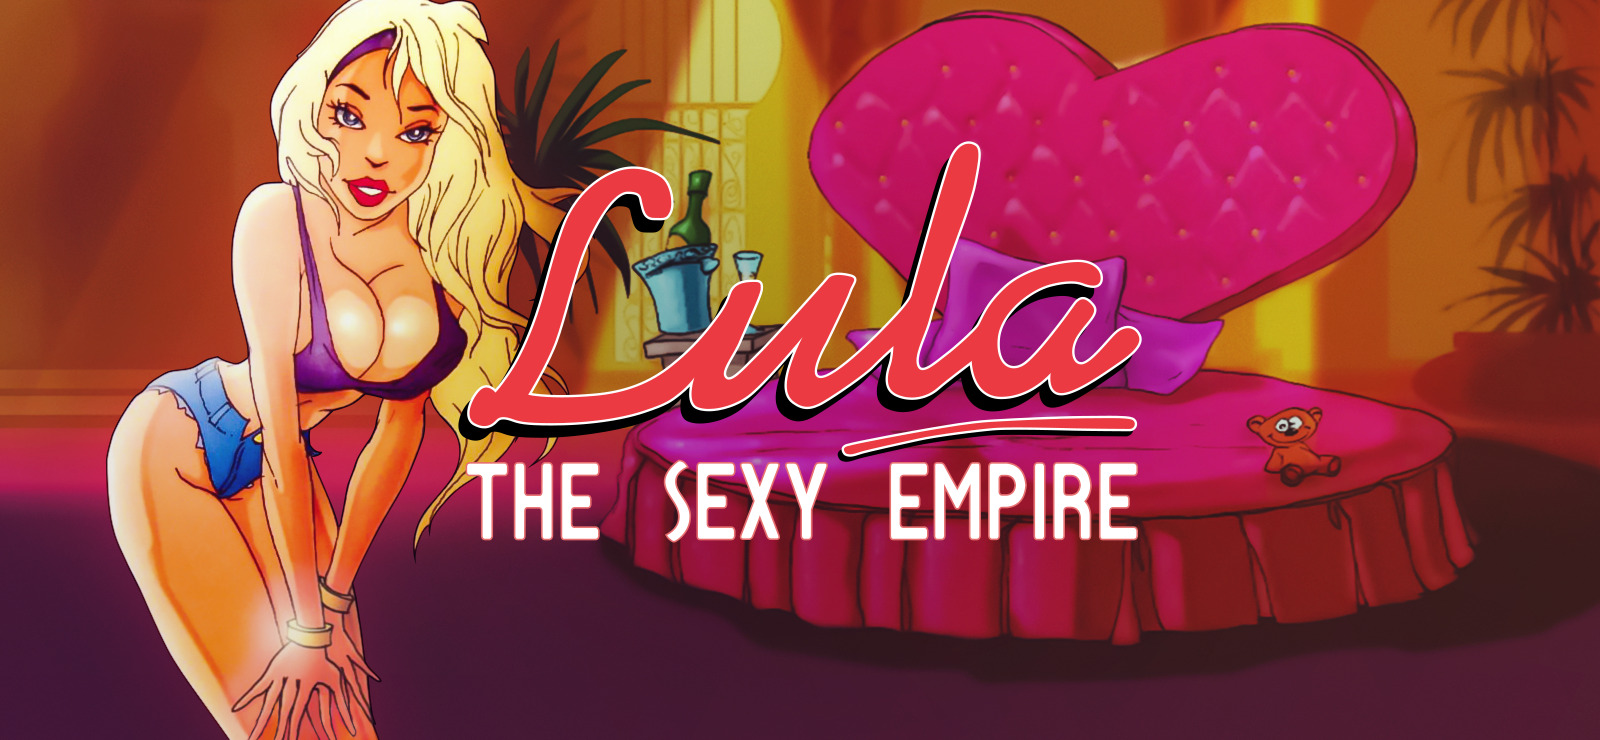 funny adult only video games - Lula: The Sexy Empire